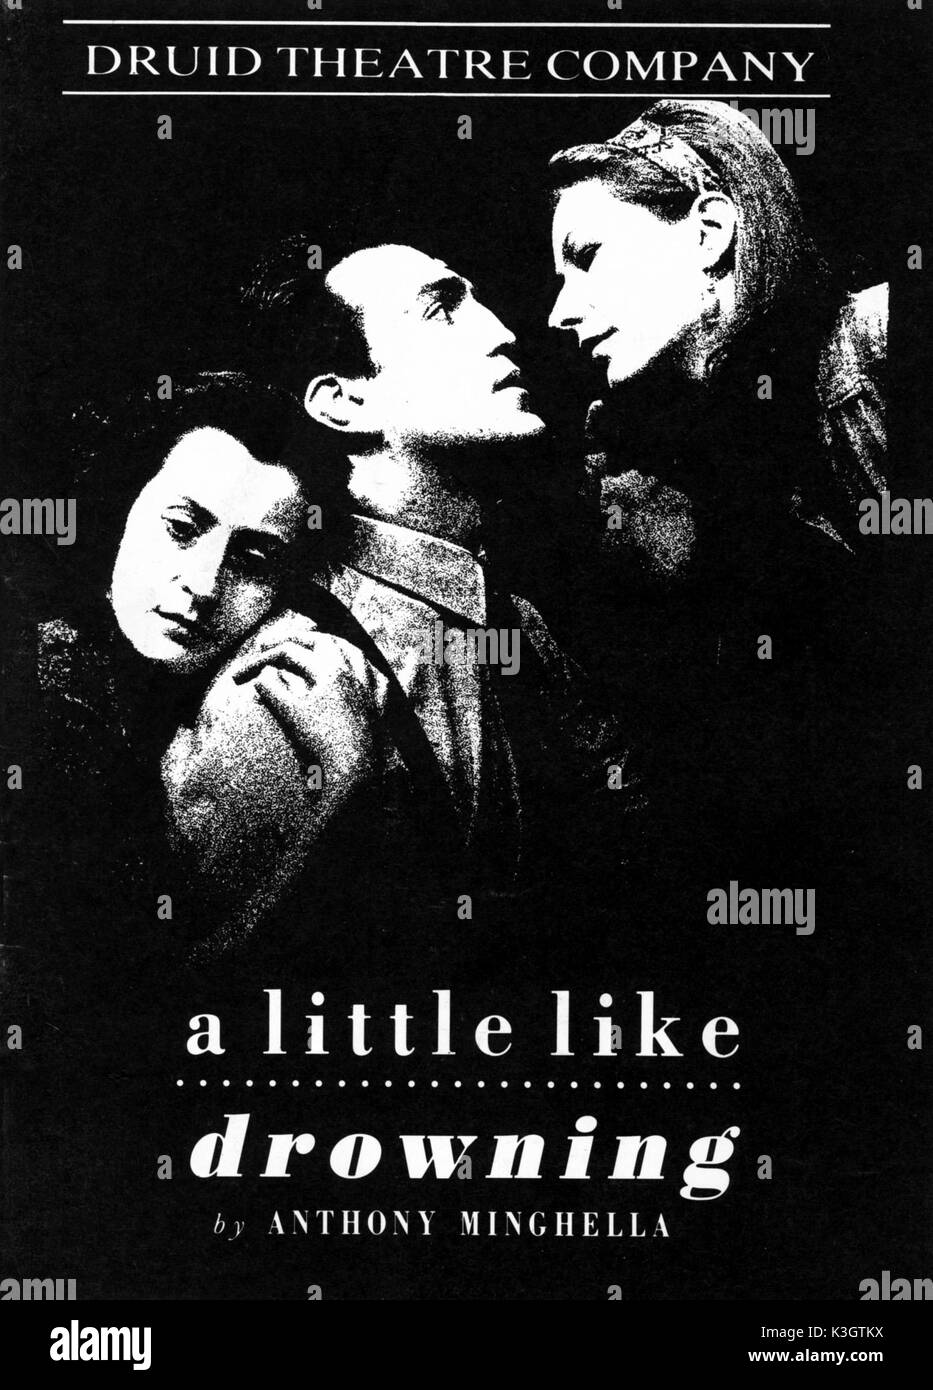 A LITTLE LIKE DROWNING   [THEATRE BR 1989 ?]  DRUID THEATRE COMPANY    DRUID LANE THEATRE, GALWAY  MARCH 6- APRIL 22 1989 OR  BELLTABLE ARTS CENTRE, LIMERICK  APRIL 24 - 29 1989 A LITTLE LIKE DROWNING   Starring KATHERINE O'TOOLE Stock Photo